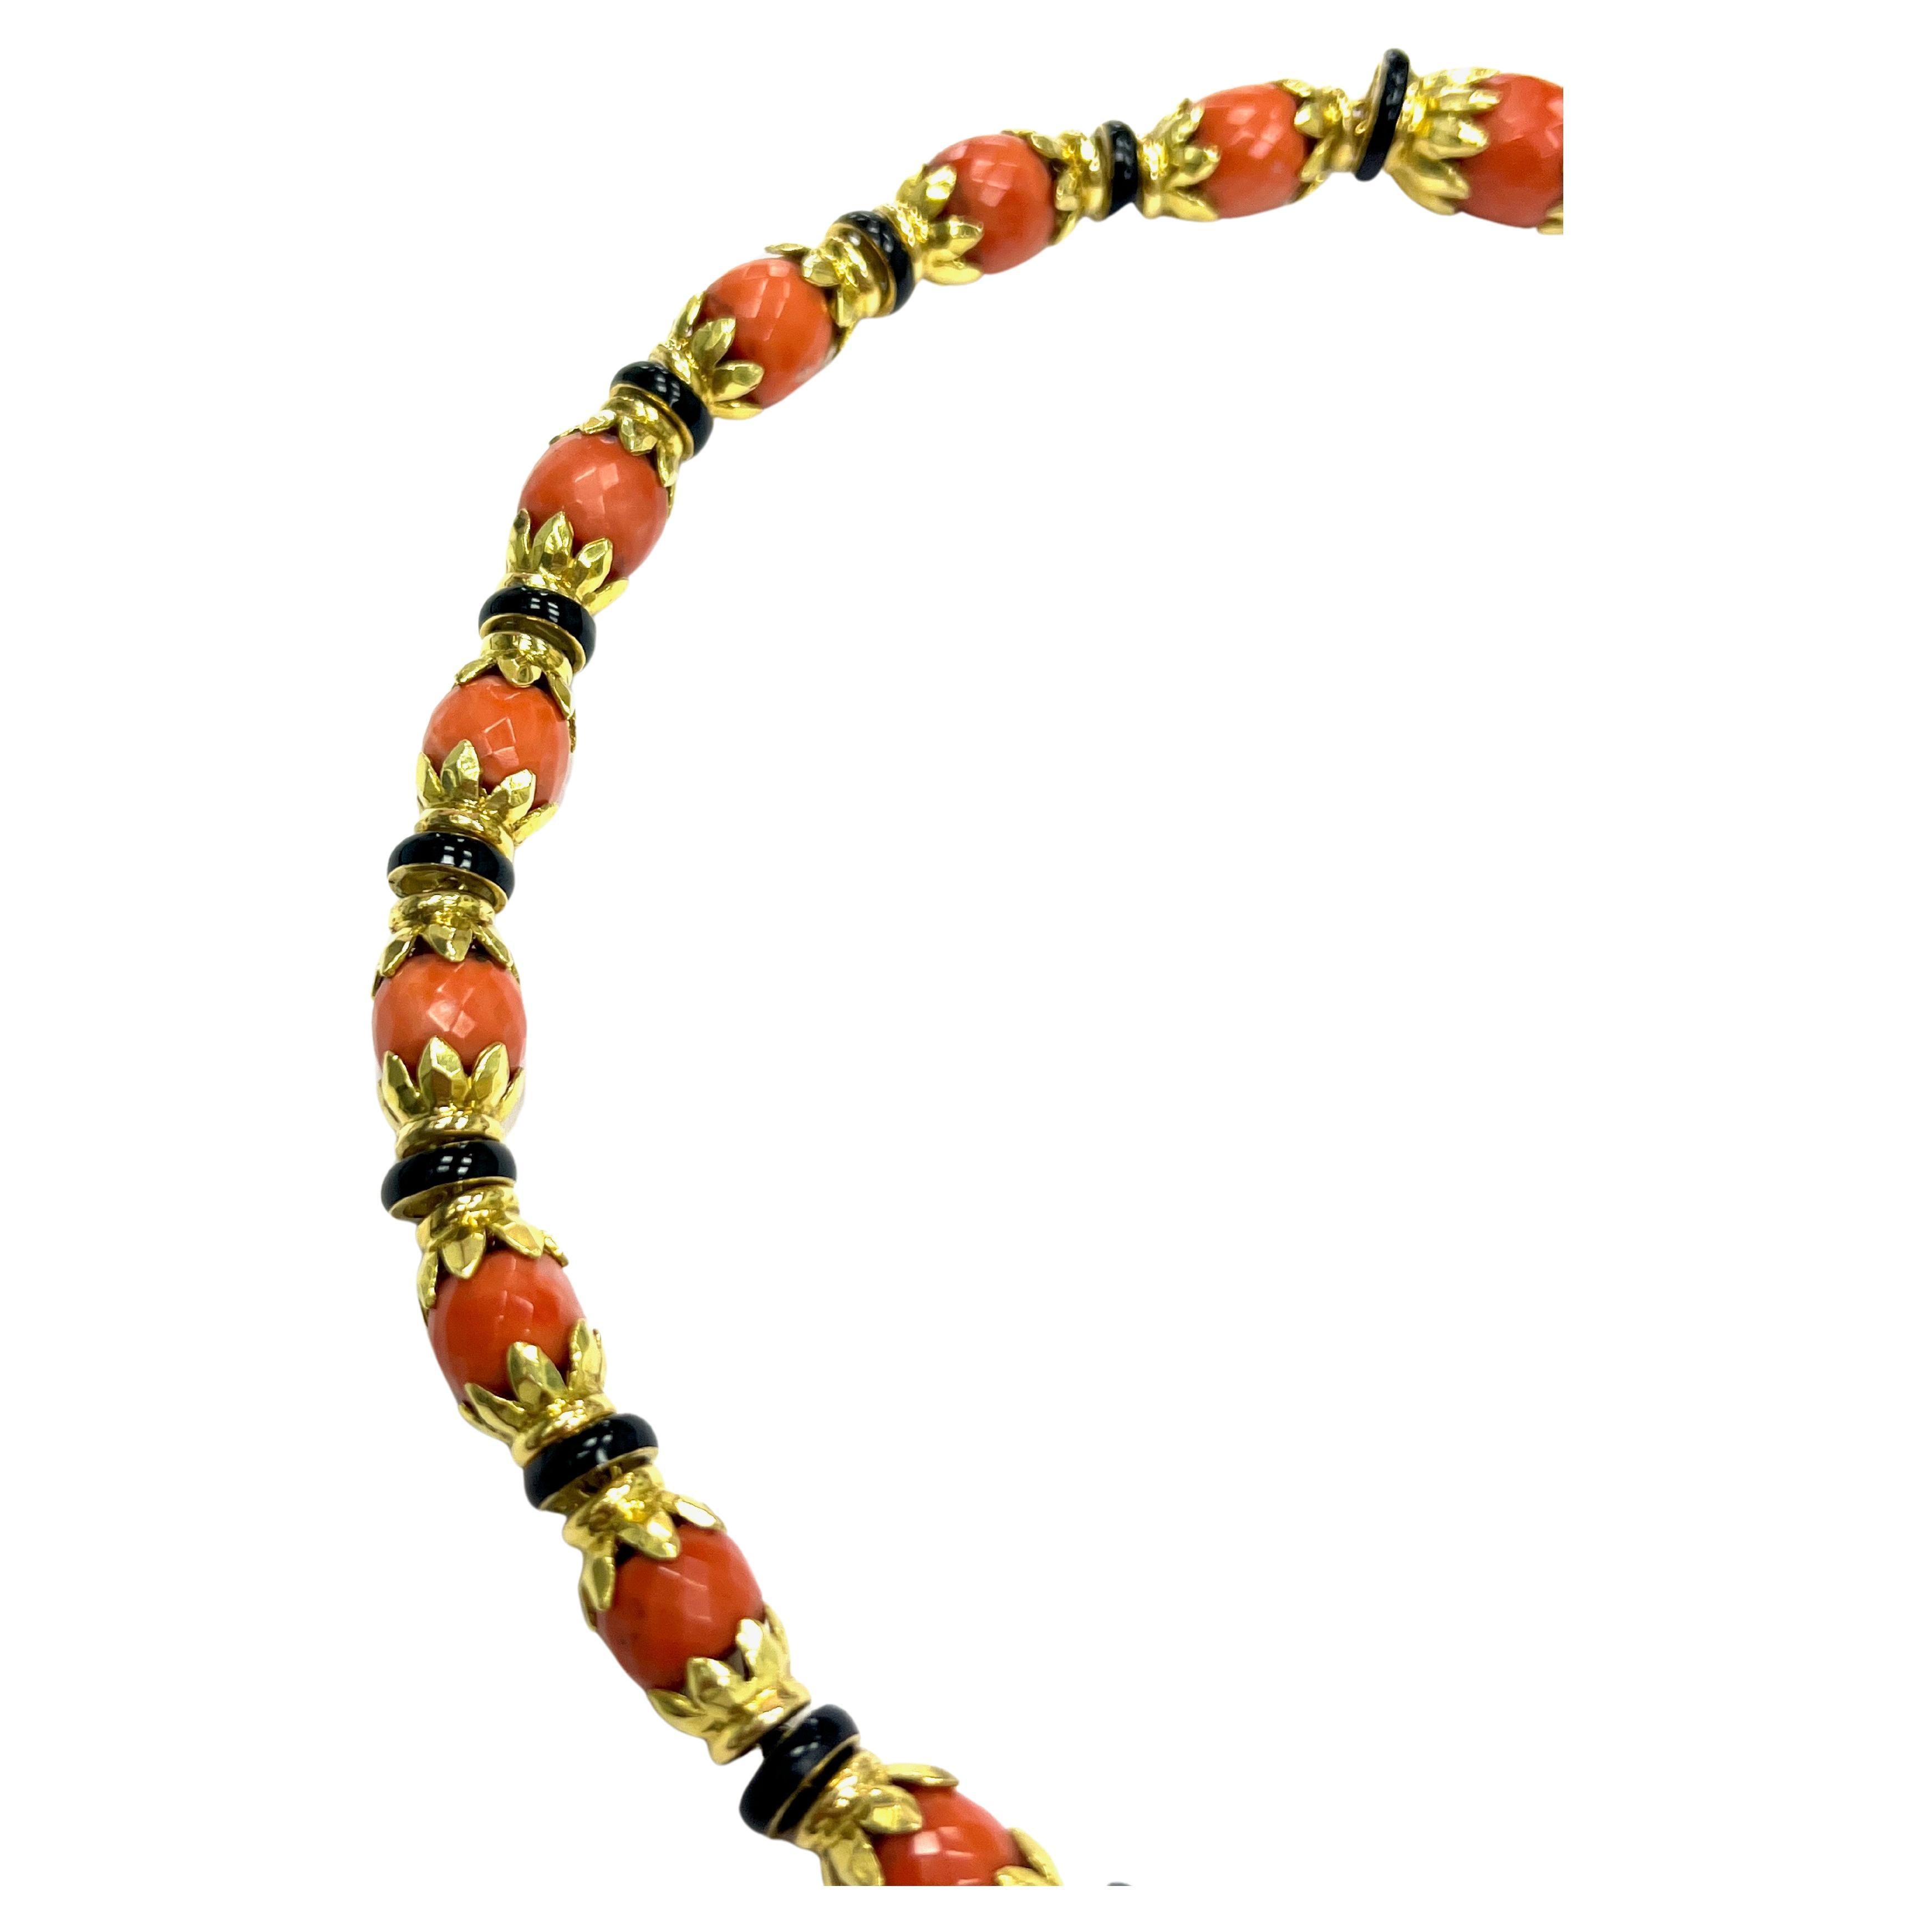 David Webb Faceted Coral Black Onyx 18k Yellow Gold Necklace

A collar necklace made of twenty faceted coral beads, twenty-one black onyx-lined discs, and 18 karat yellow gold; marked Webb, 18k

This necklace can be separated into two parts that can